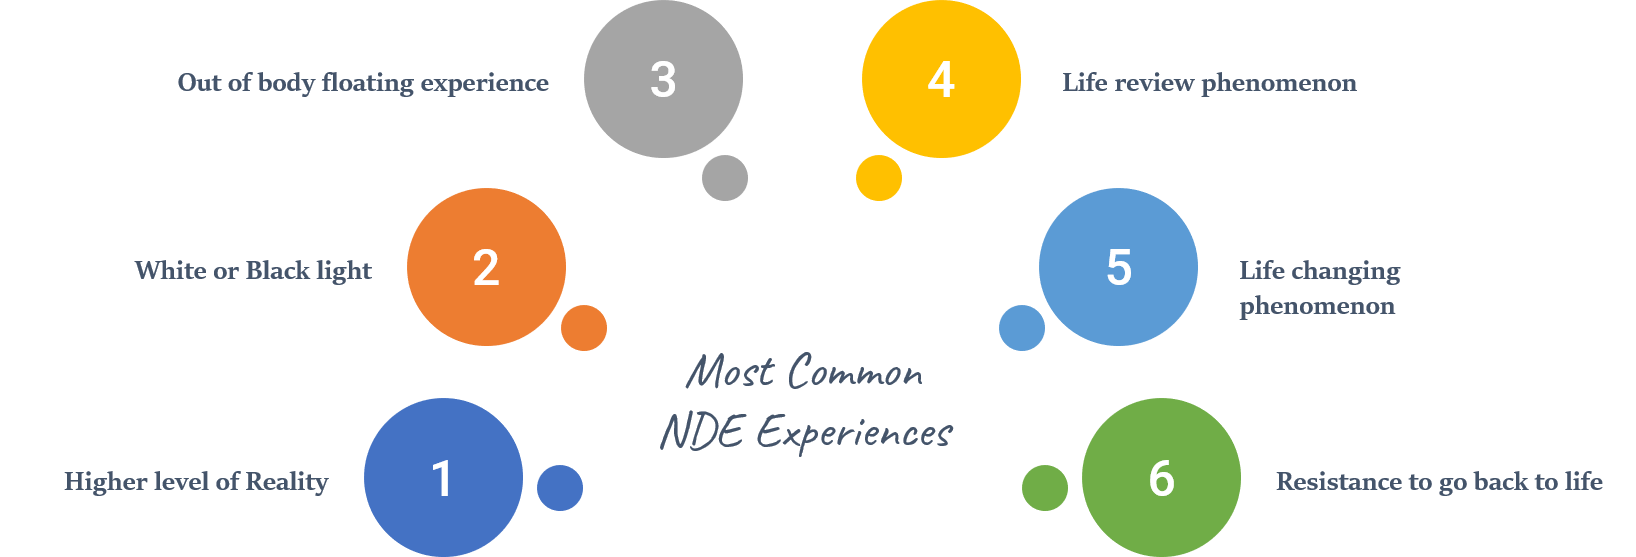 Most Common NDE Experiences